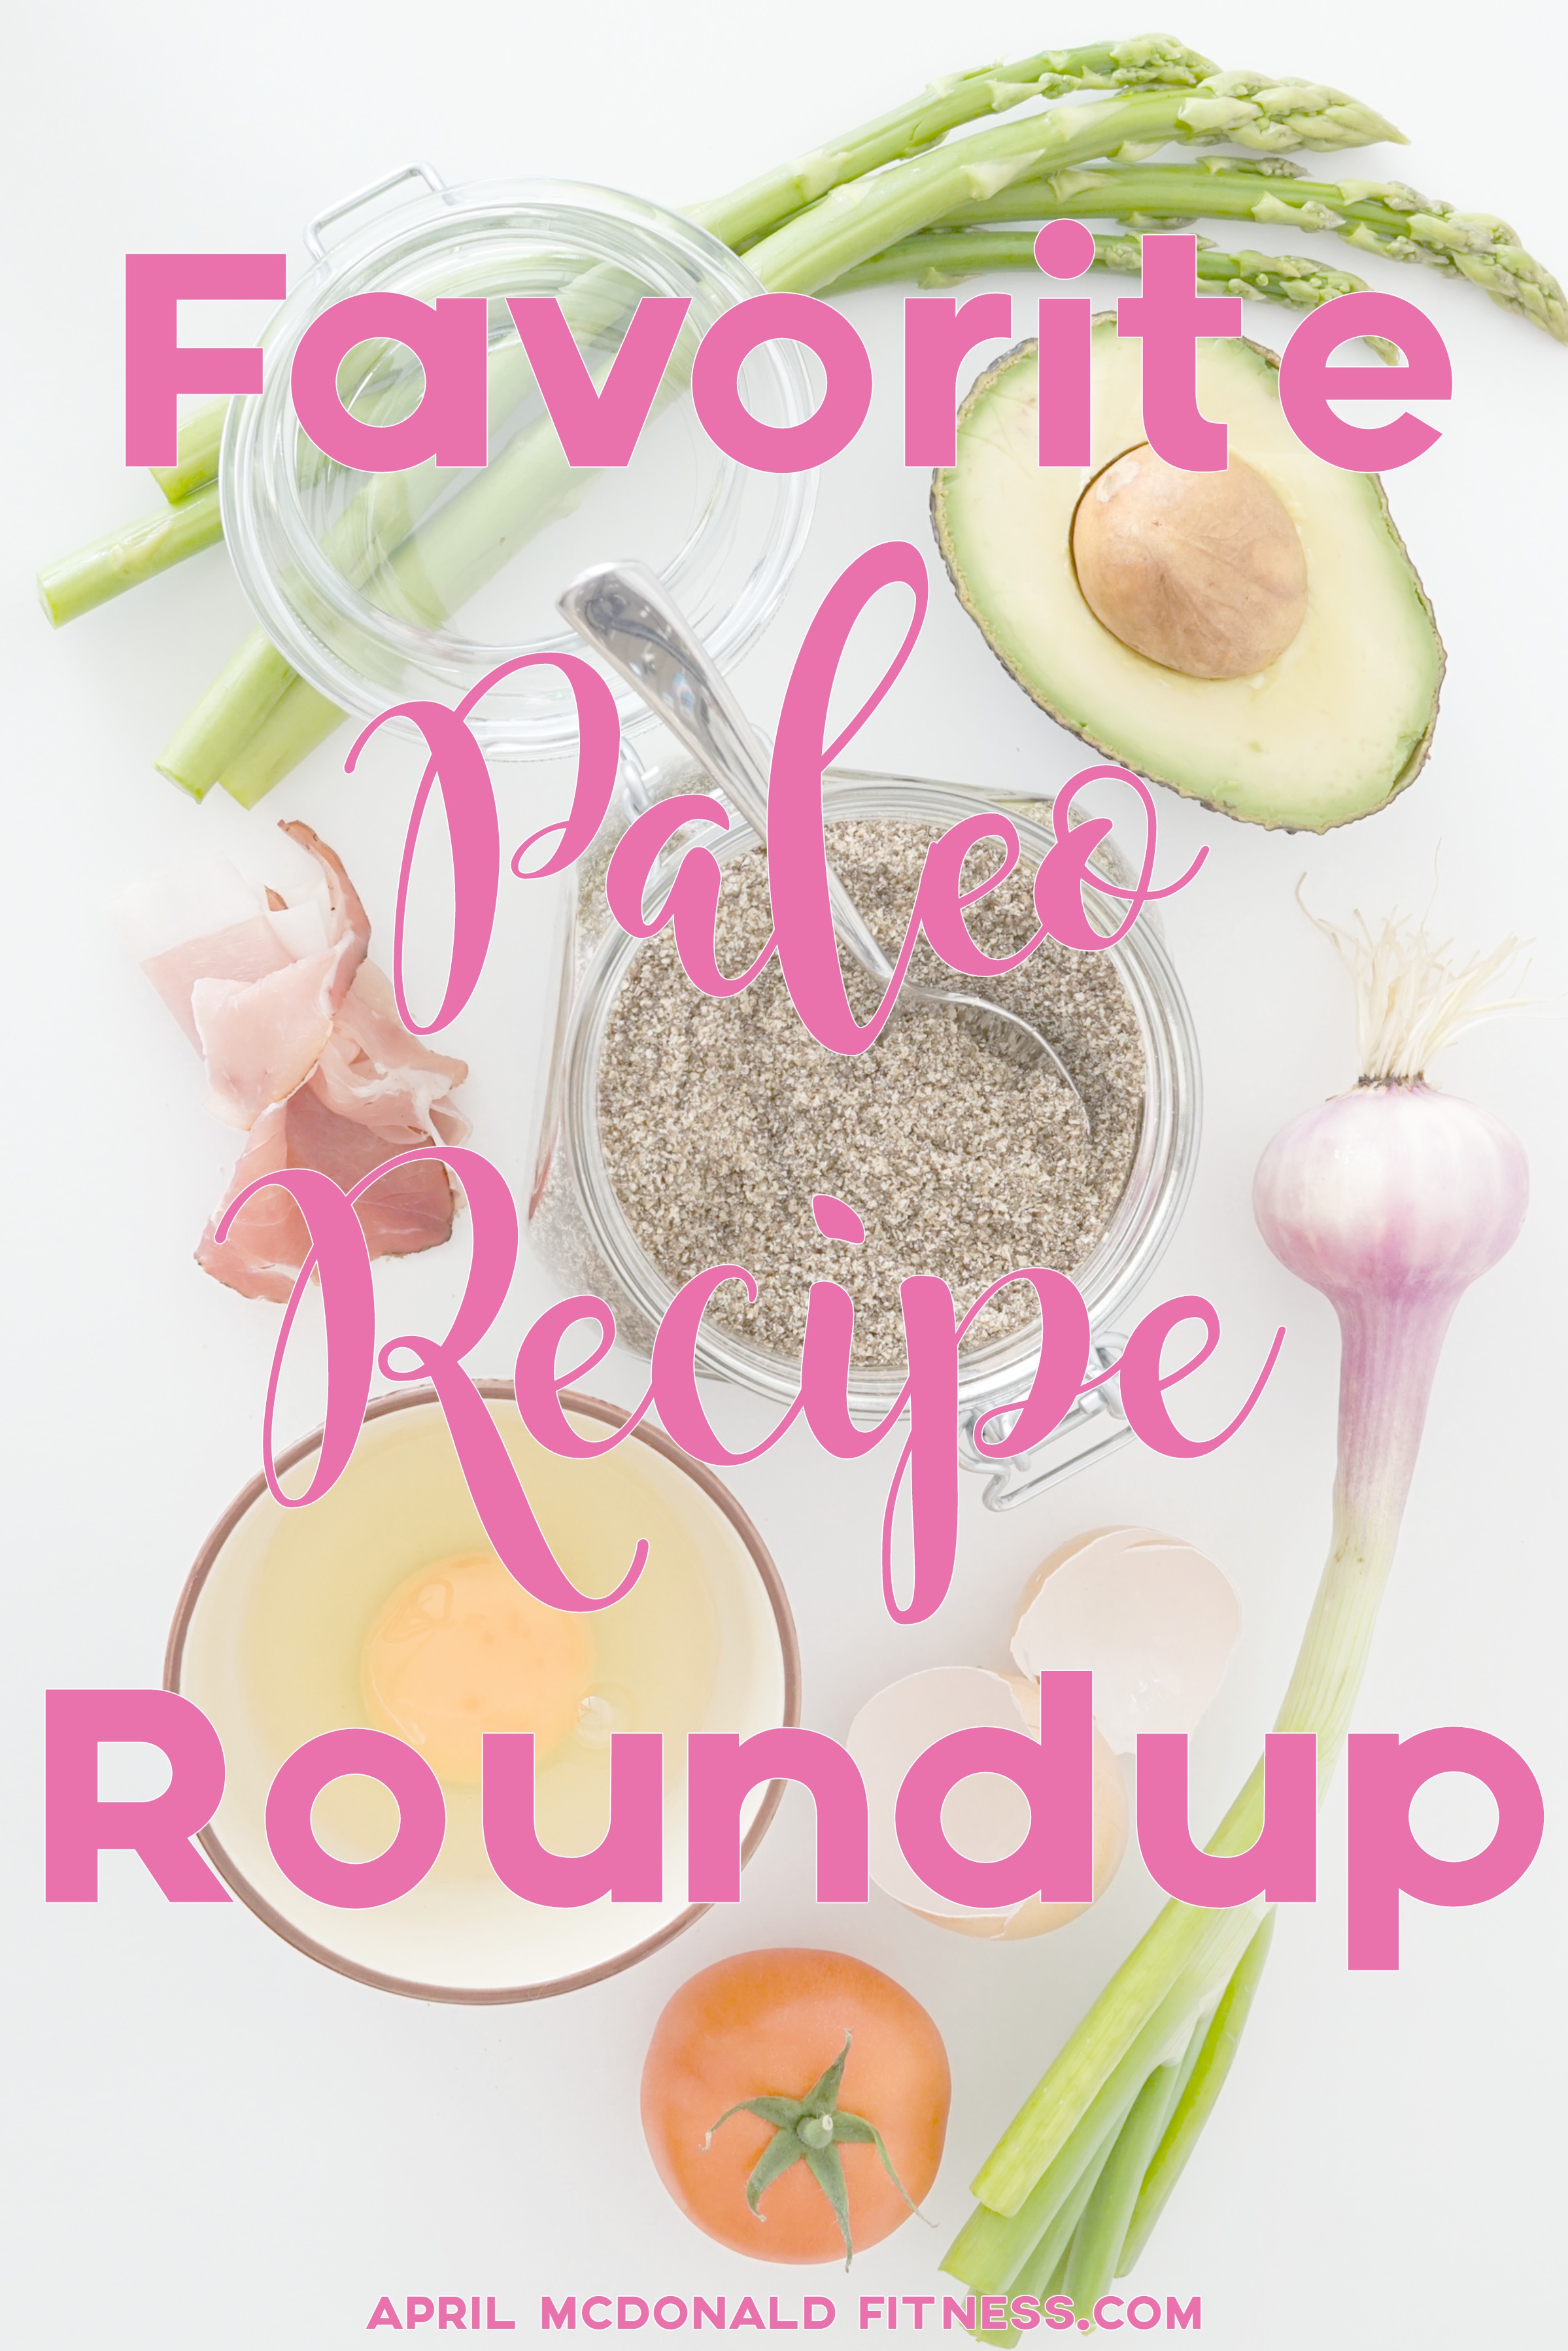 Eating paleo recipes doesn't have to be boring and tasteless. They can be exciting and varied! Check out this recipe roundup!